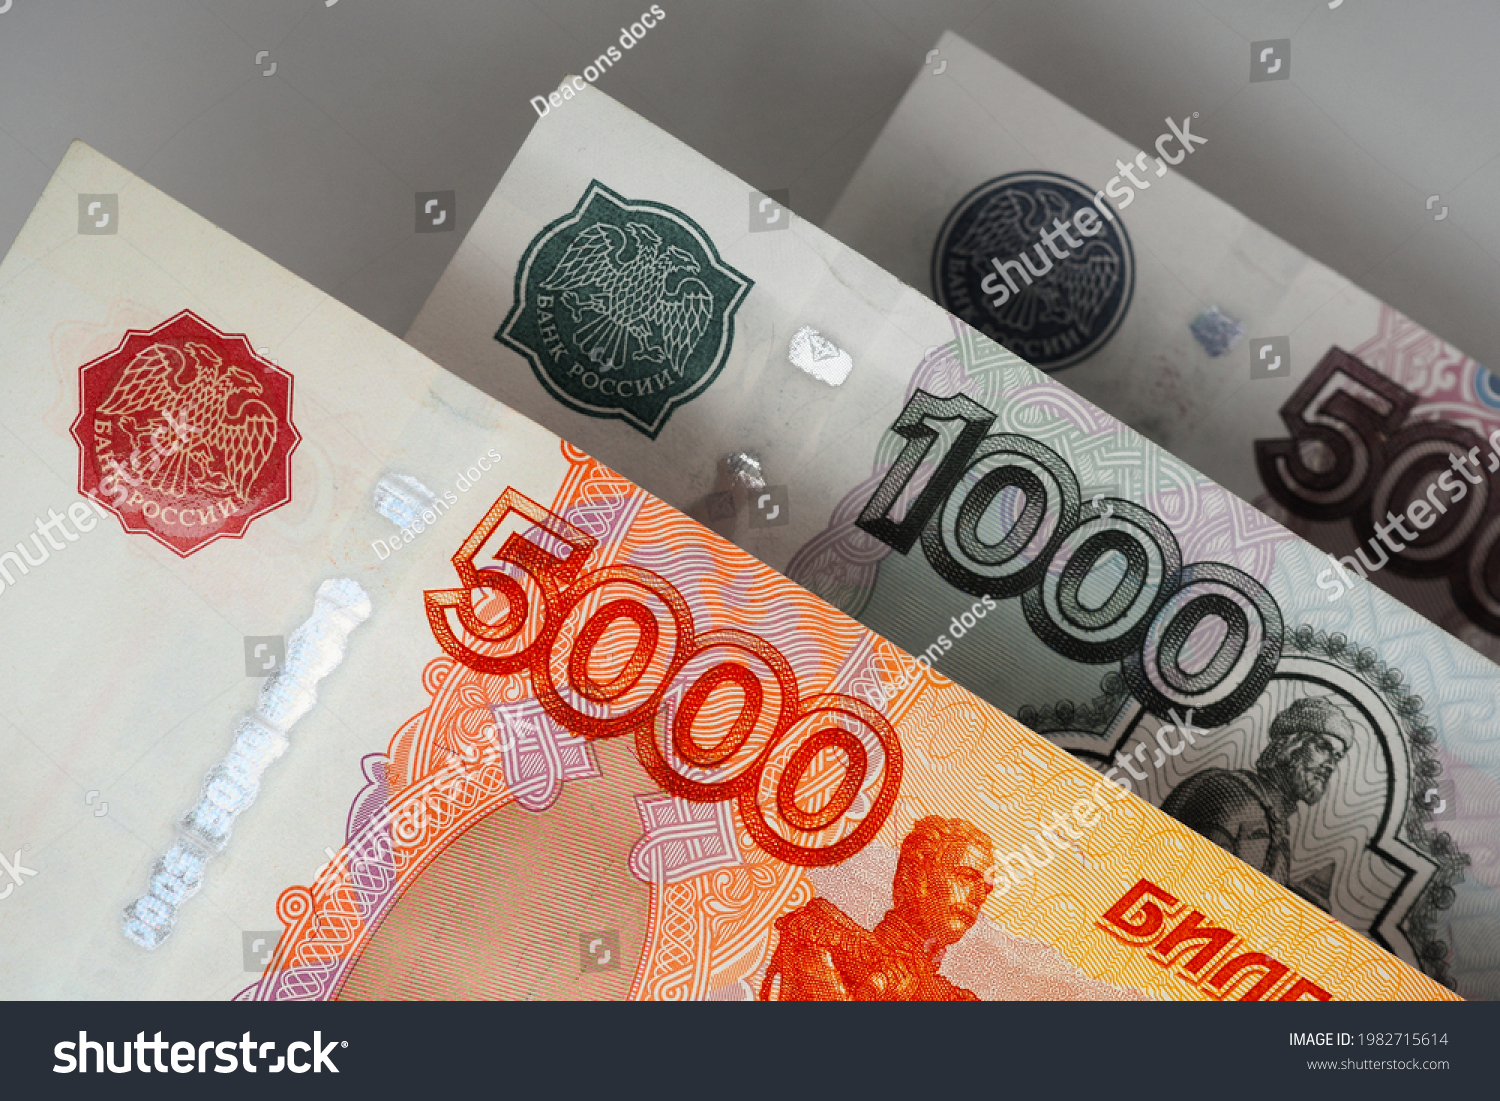 Russian banknotes 5000, 1000 and 500 rubles close up. Bright expressive illustration about economy and money of Russia. Nearest bill is highlighted in vivid color, other notes are pale. Macro #1982715614